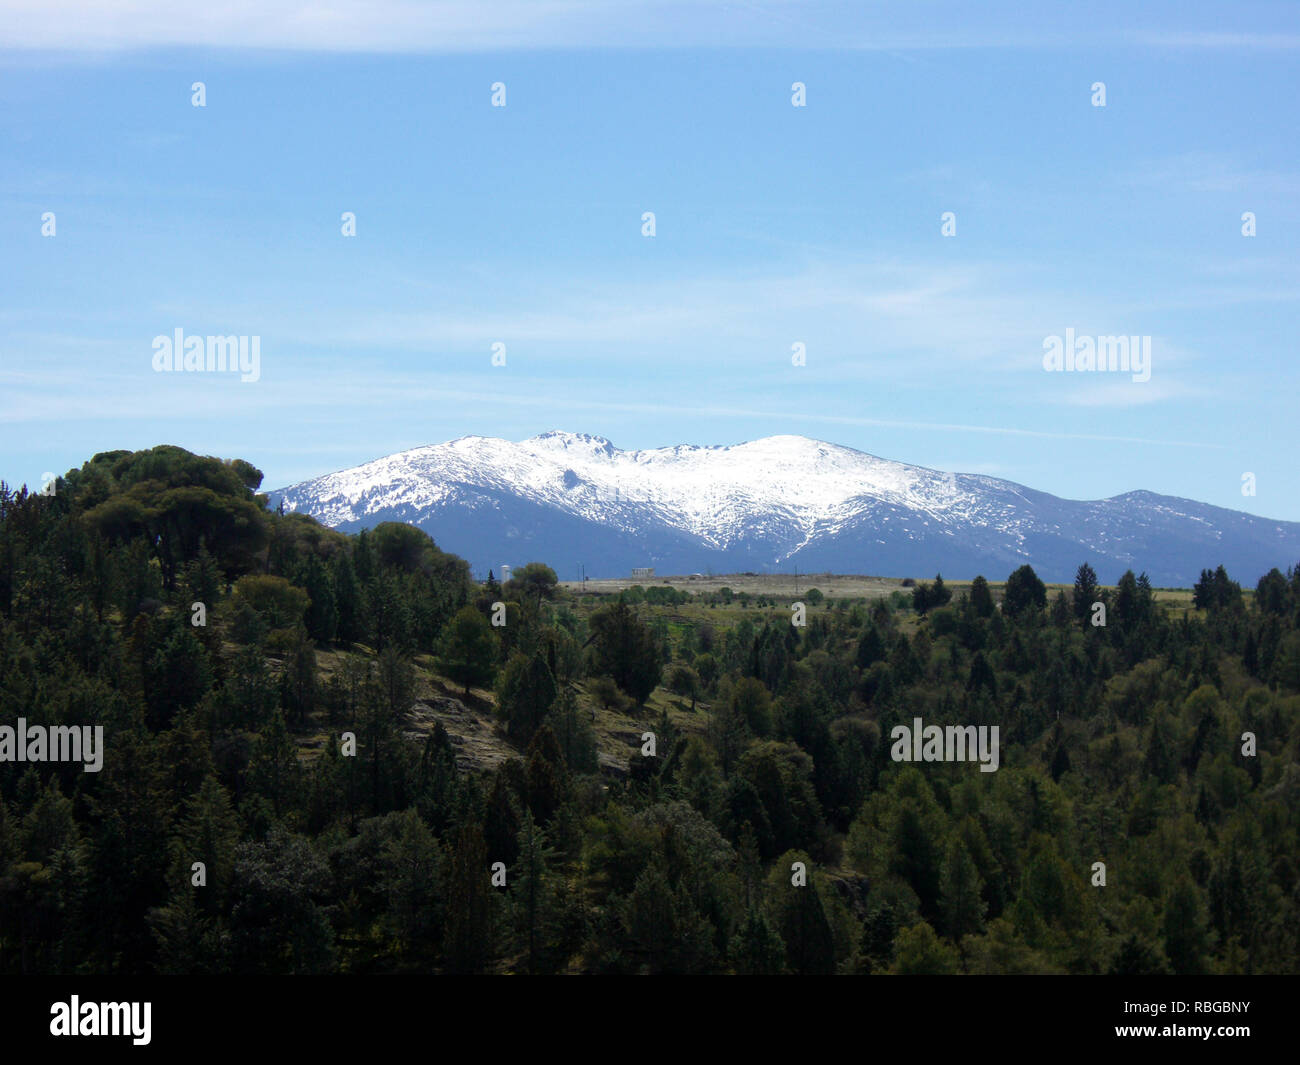 Snow capped mountains view from a Spanish countryside Stock Photo